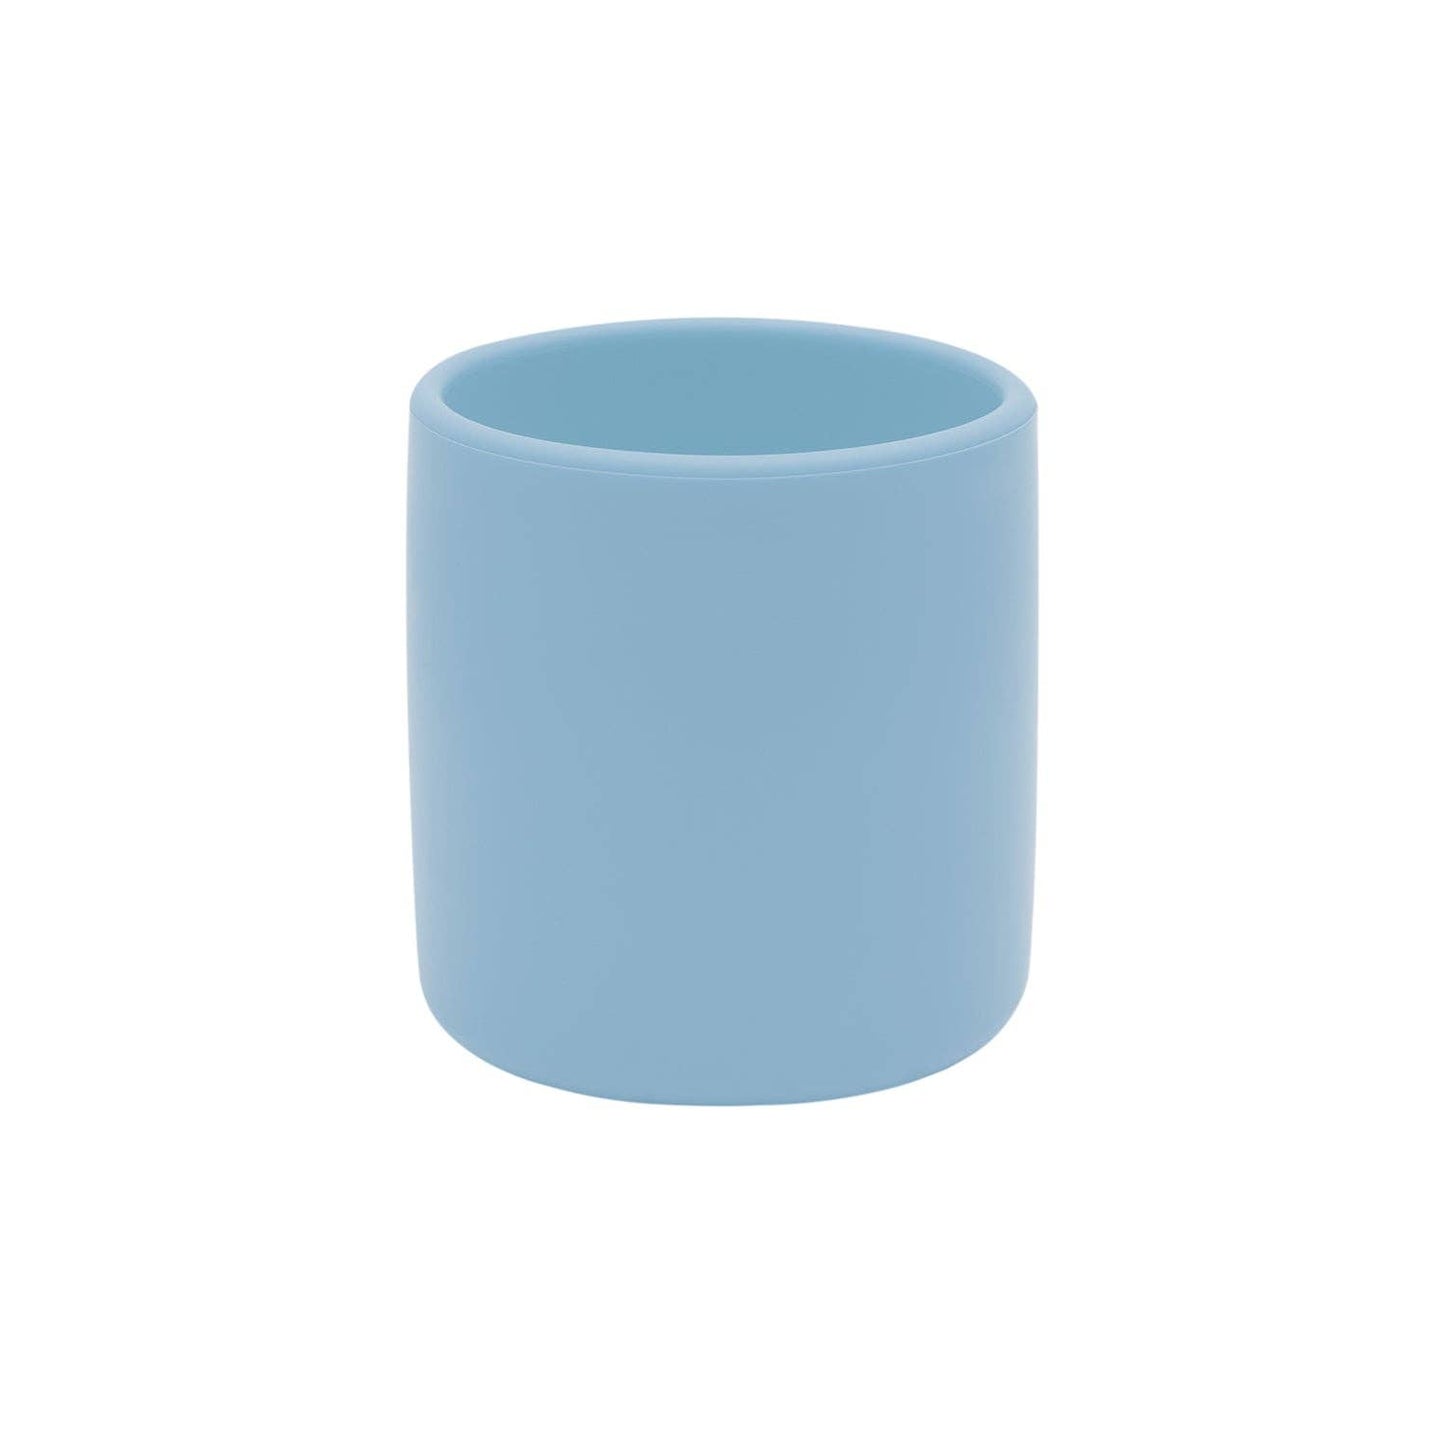 Our ergonomically designed silicone Grip Cup is the perfect companion to evolve with your little ones as they progress from bottle or sippy cup to big-kid cup. Its soft-to-touch finish helps small toddler hands with the perfect grip and prevents those spills that can upset littlies.Powder Blue colour